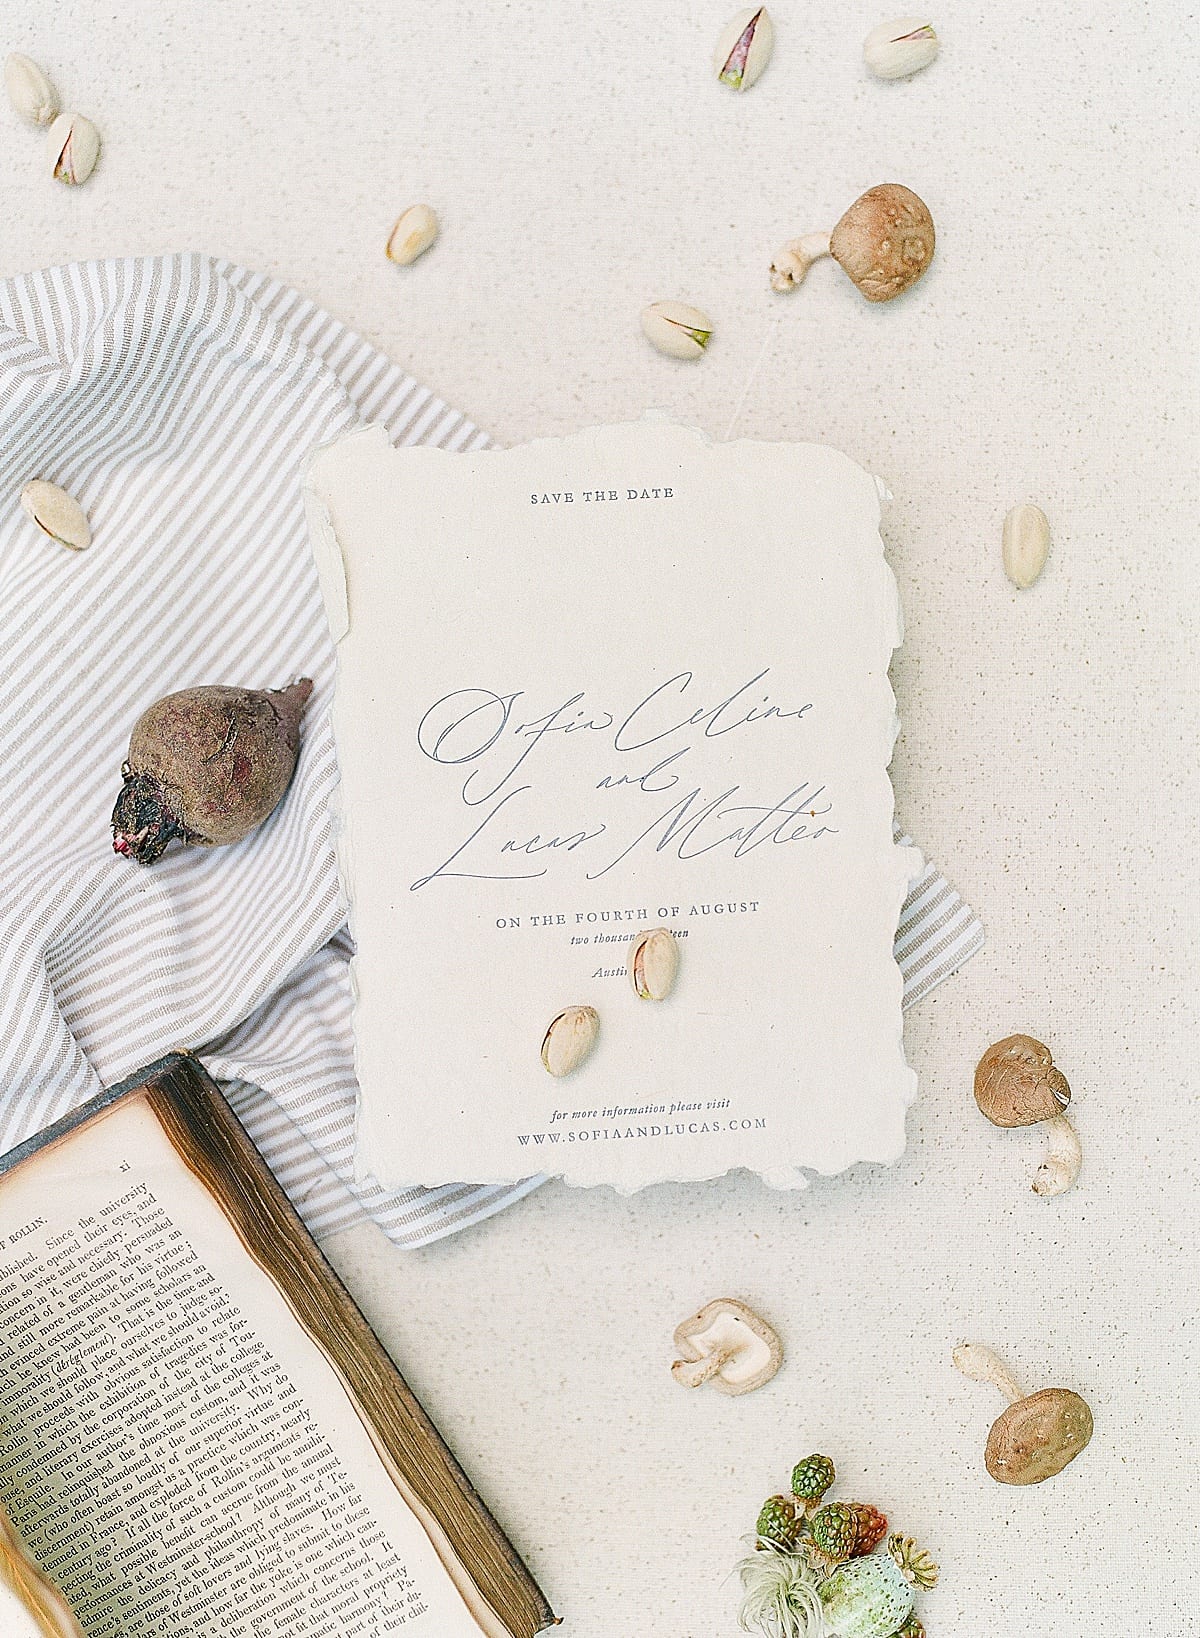 Save the date wedding invitation with book flat lay photo